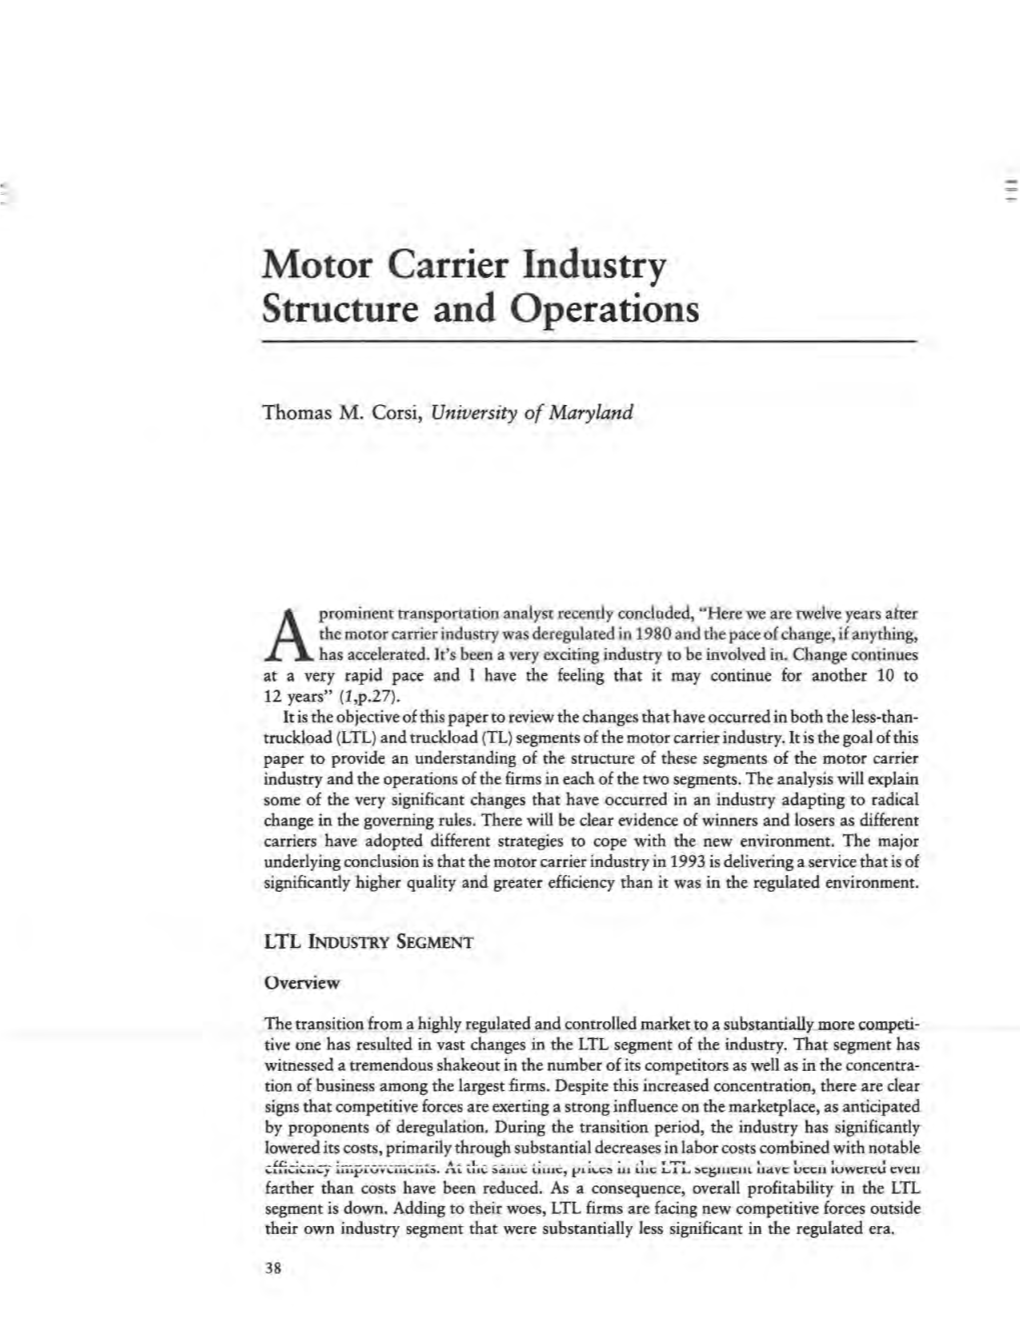 Motor Carrier Industry Structure and Operations